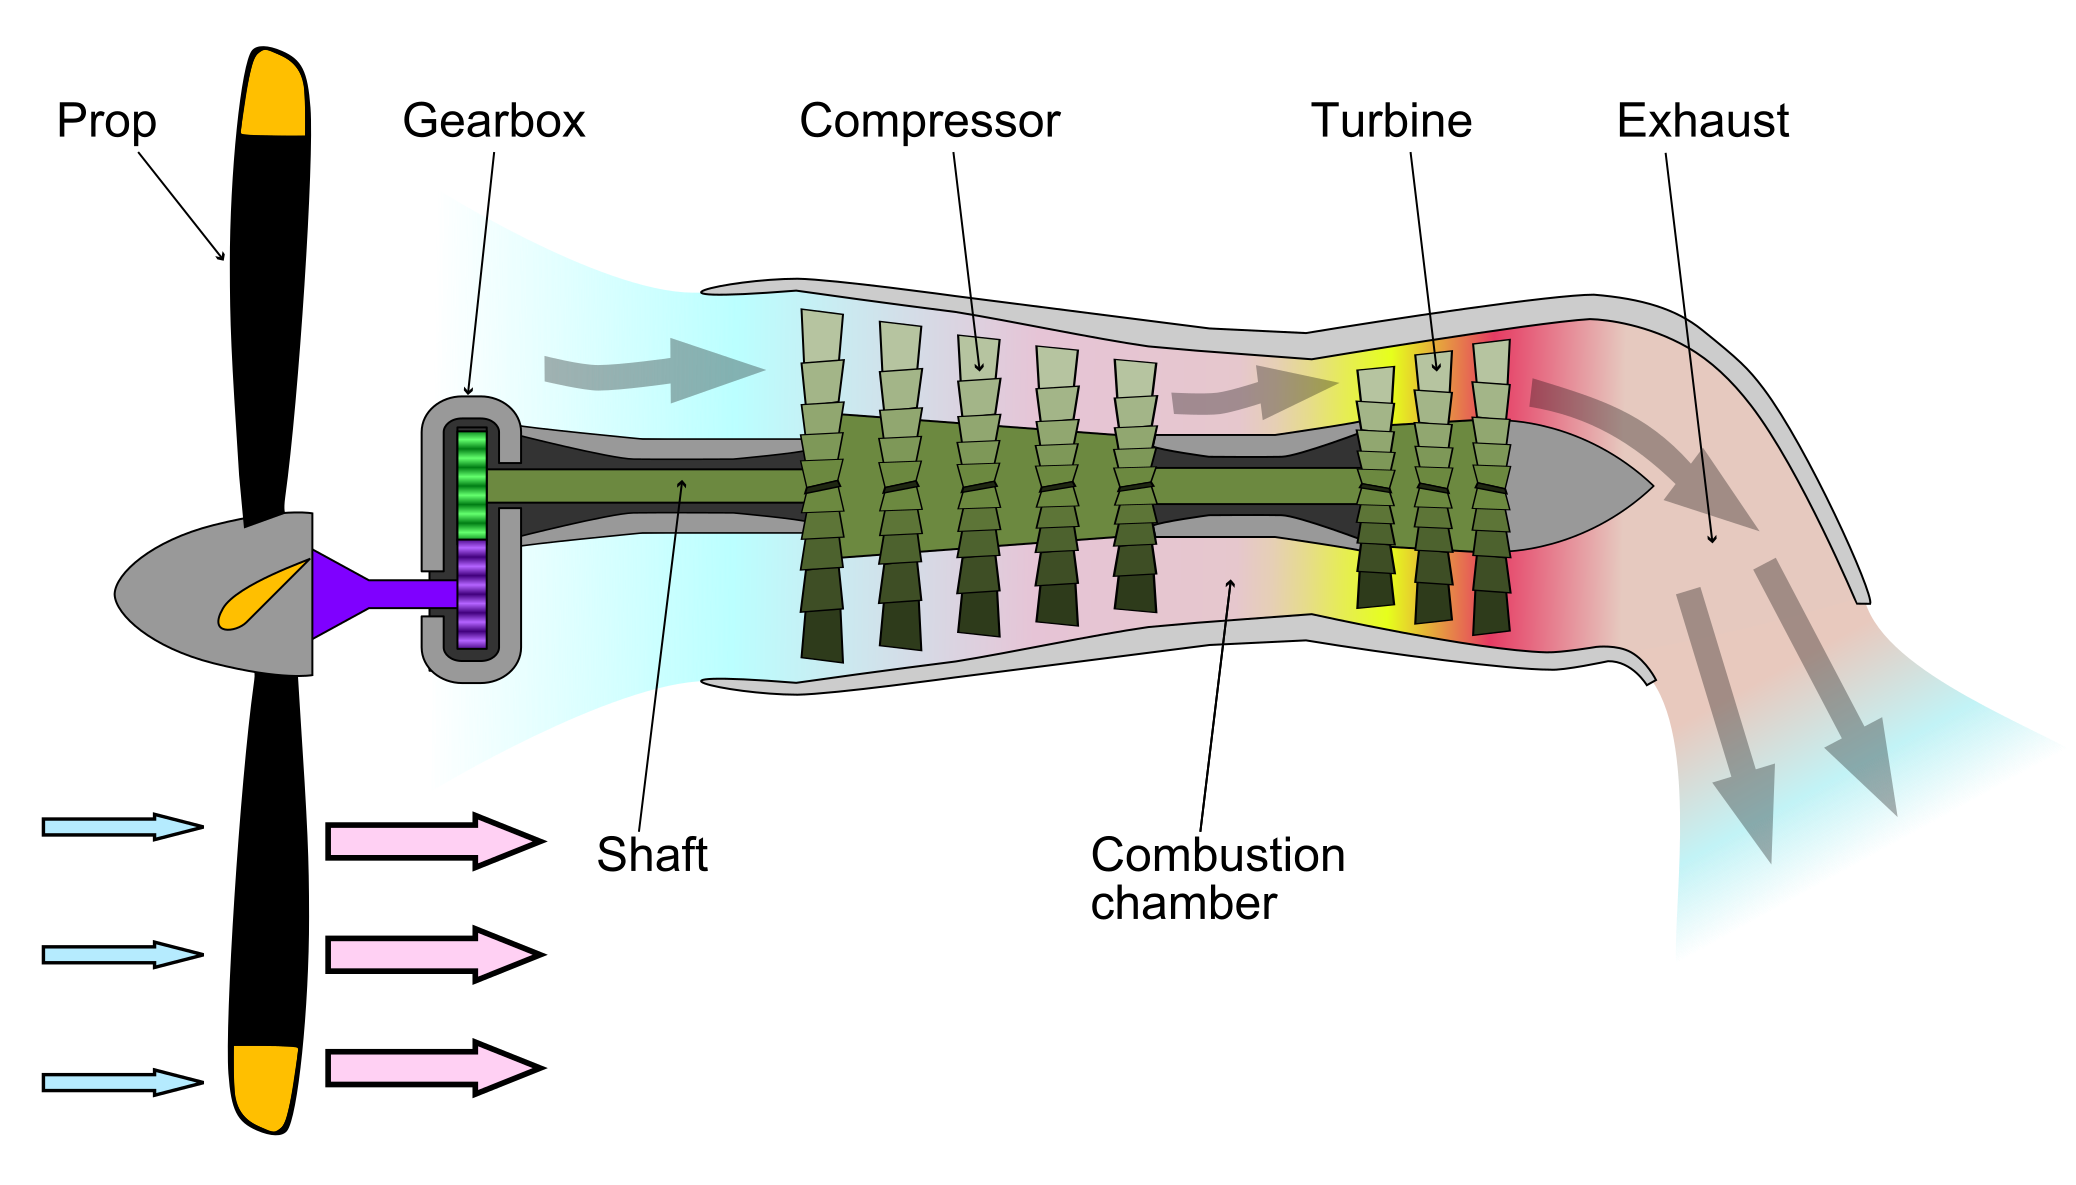 Turboprop engine schematic. Source: Emoscopes/CC BY-SA 3.0 (Click image to enlarge.)